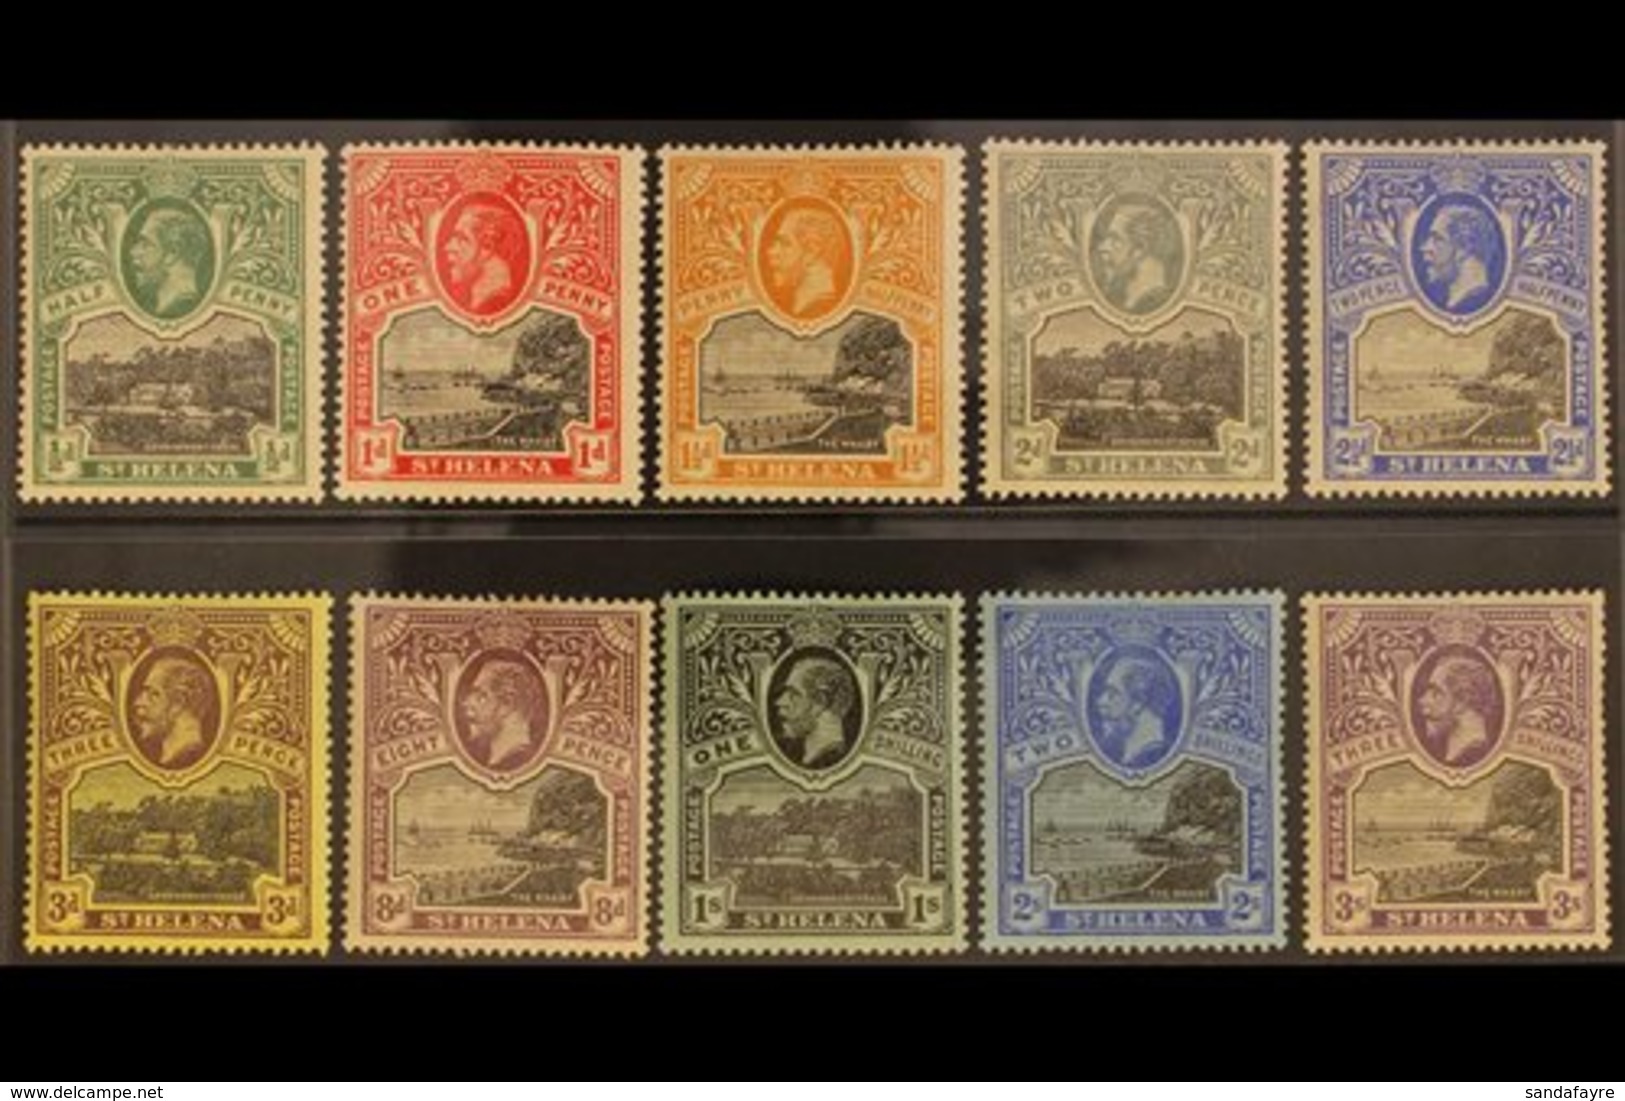 1912-16 Definitives Complete Set, SG 72/81, Very Fine Mint. Fresh And Attractive! (10 Stamps) For More Images, Please Vi - Isola Di Sant'Elena